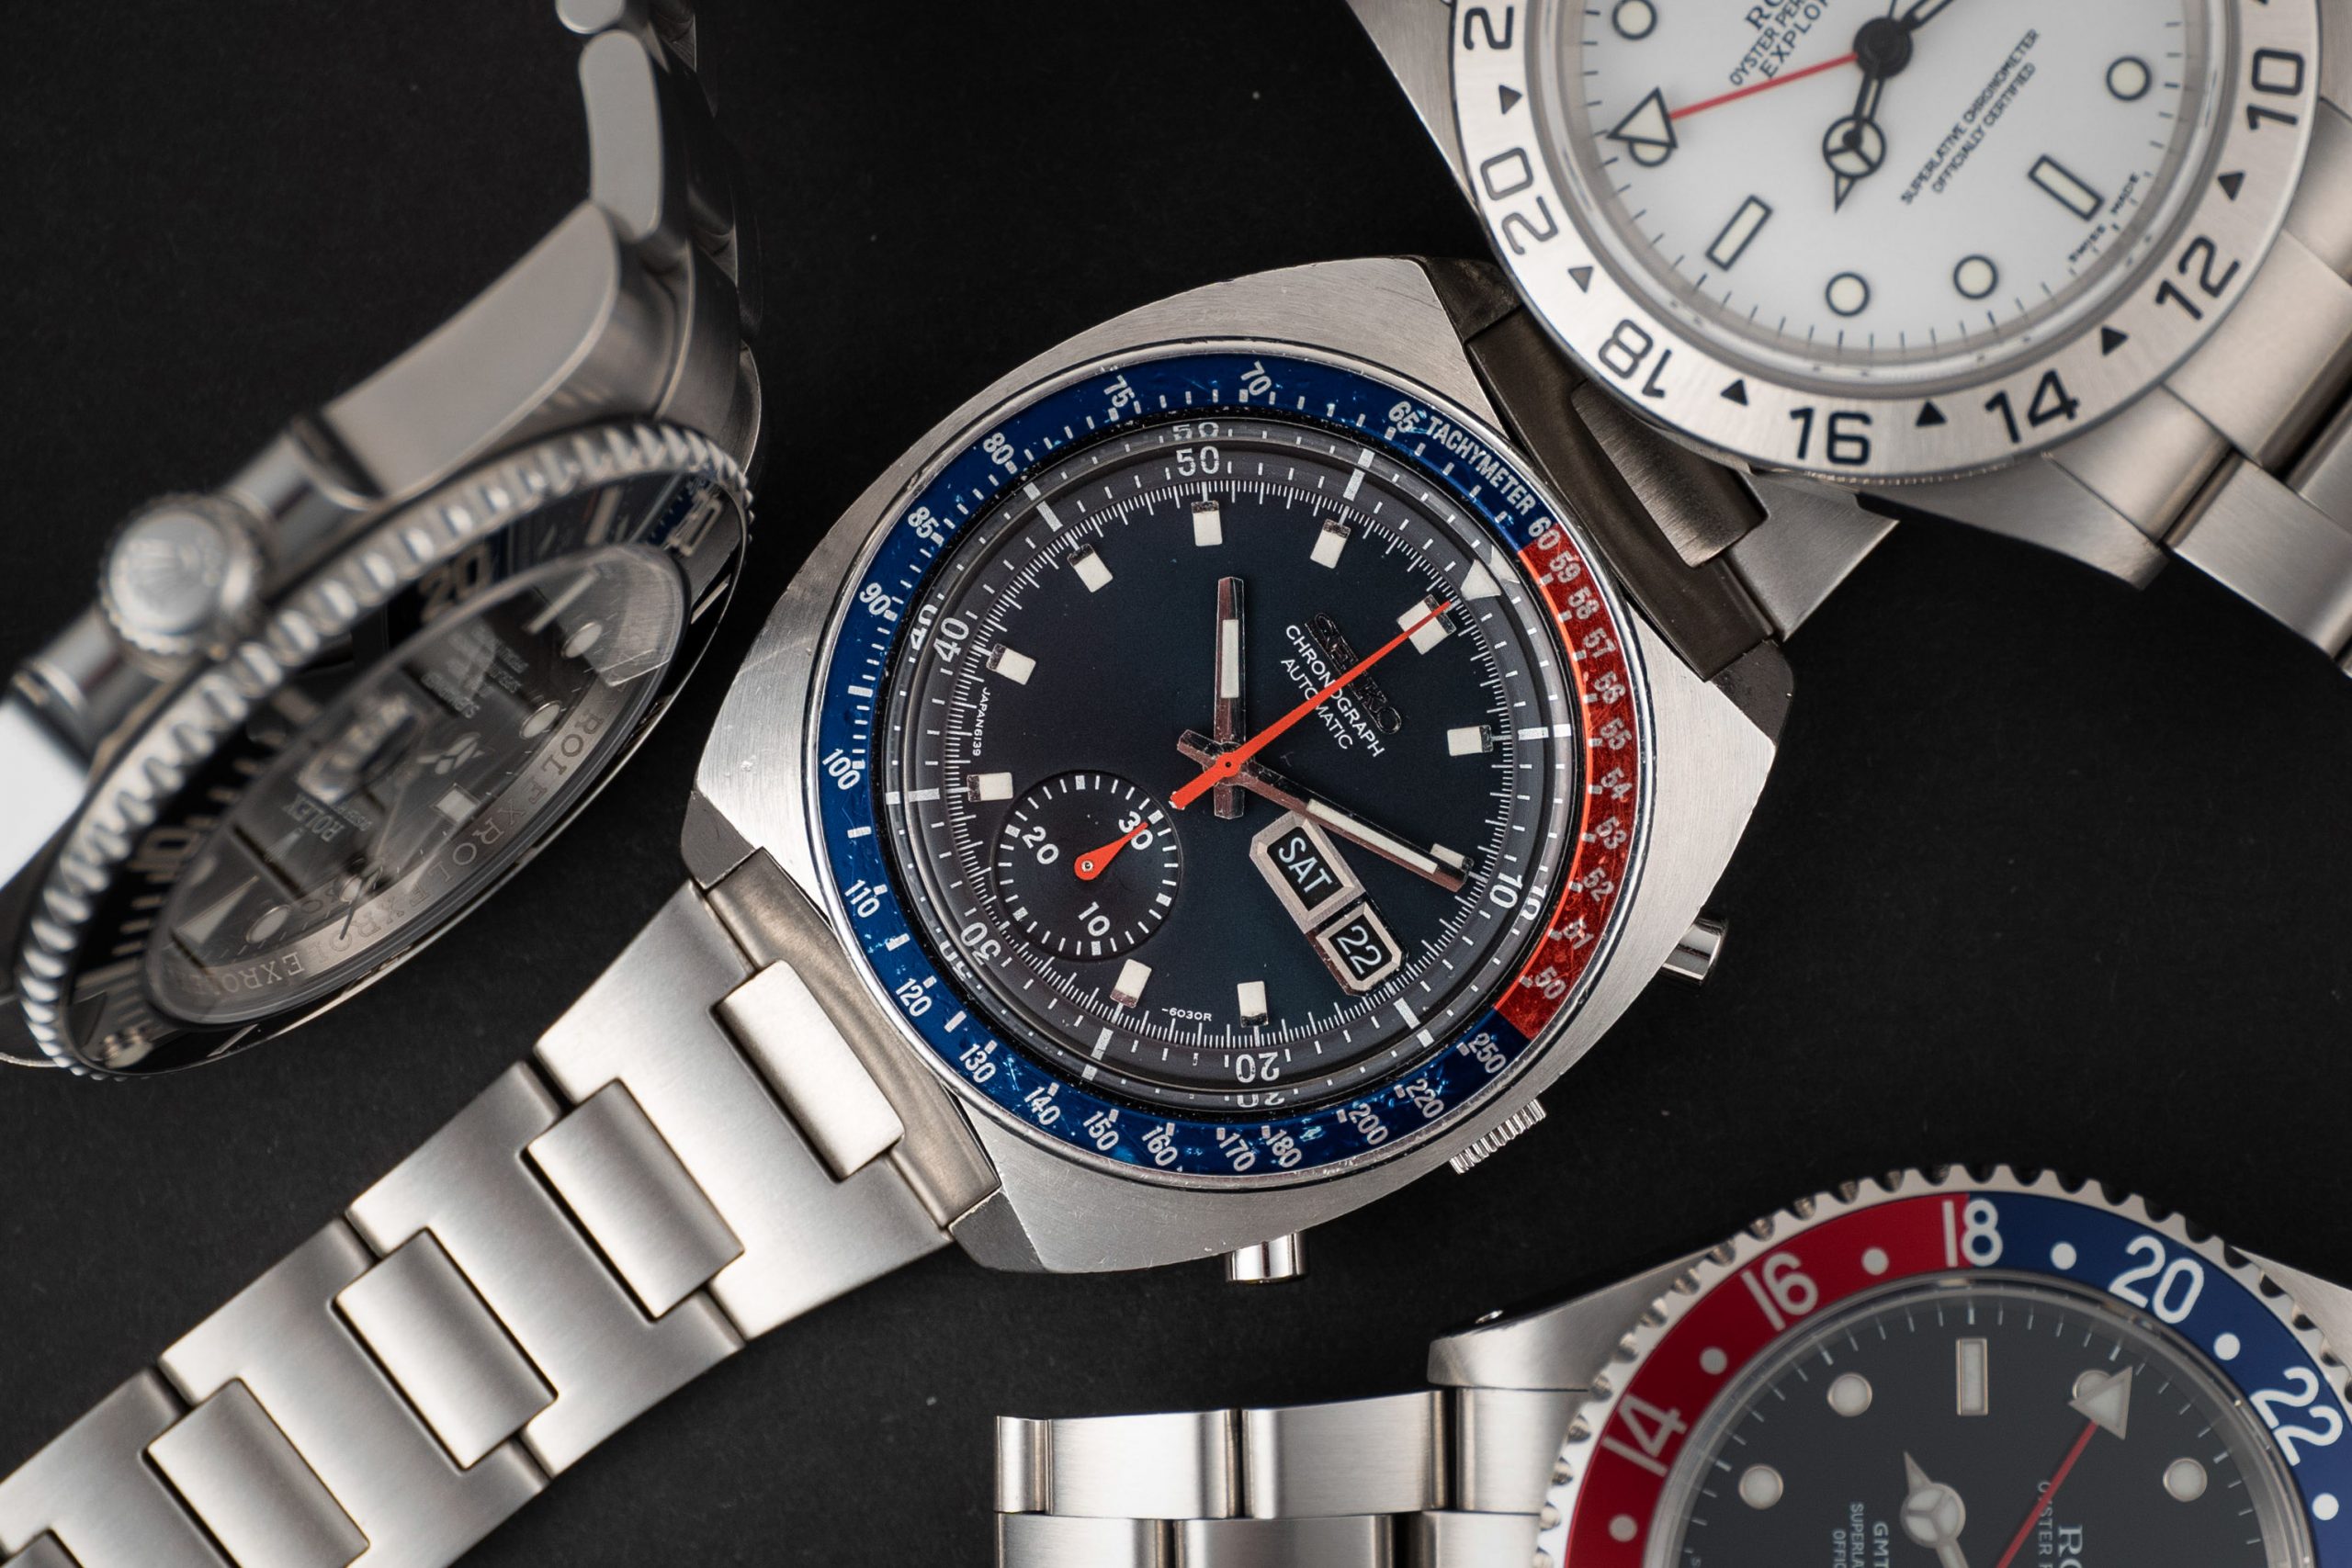 <span class='btd-post-cat-branding'>Curating the Collection </span>– A Vintage Seiko Speedtimer 6139 Pogue Chronograph Ousts a Ceramic Daytona From a Rolex Collection